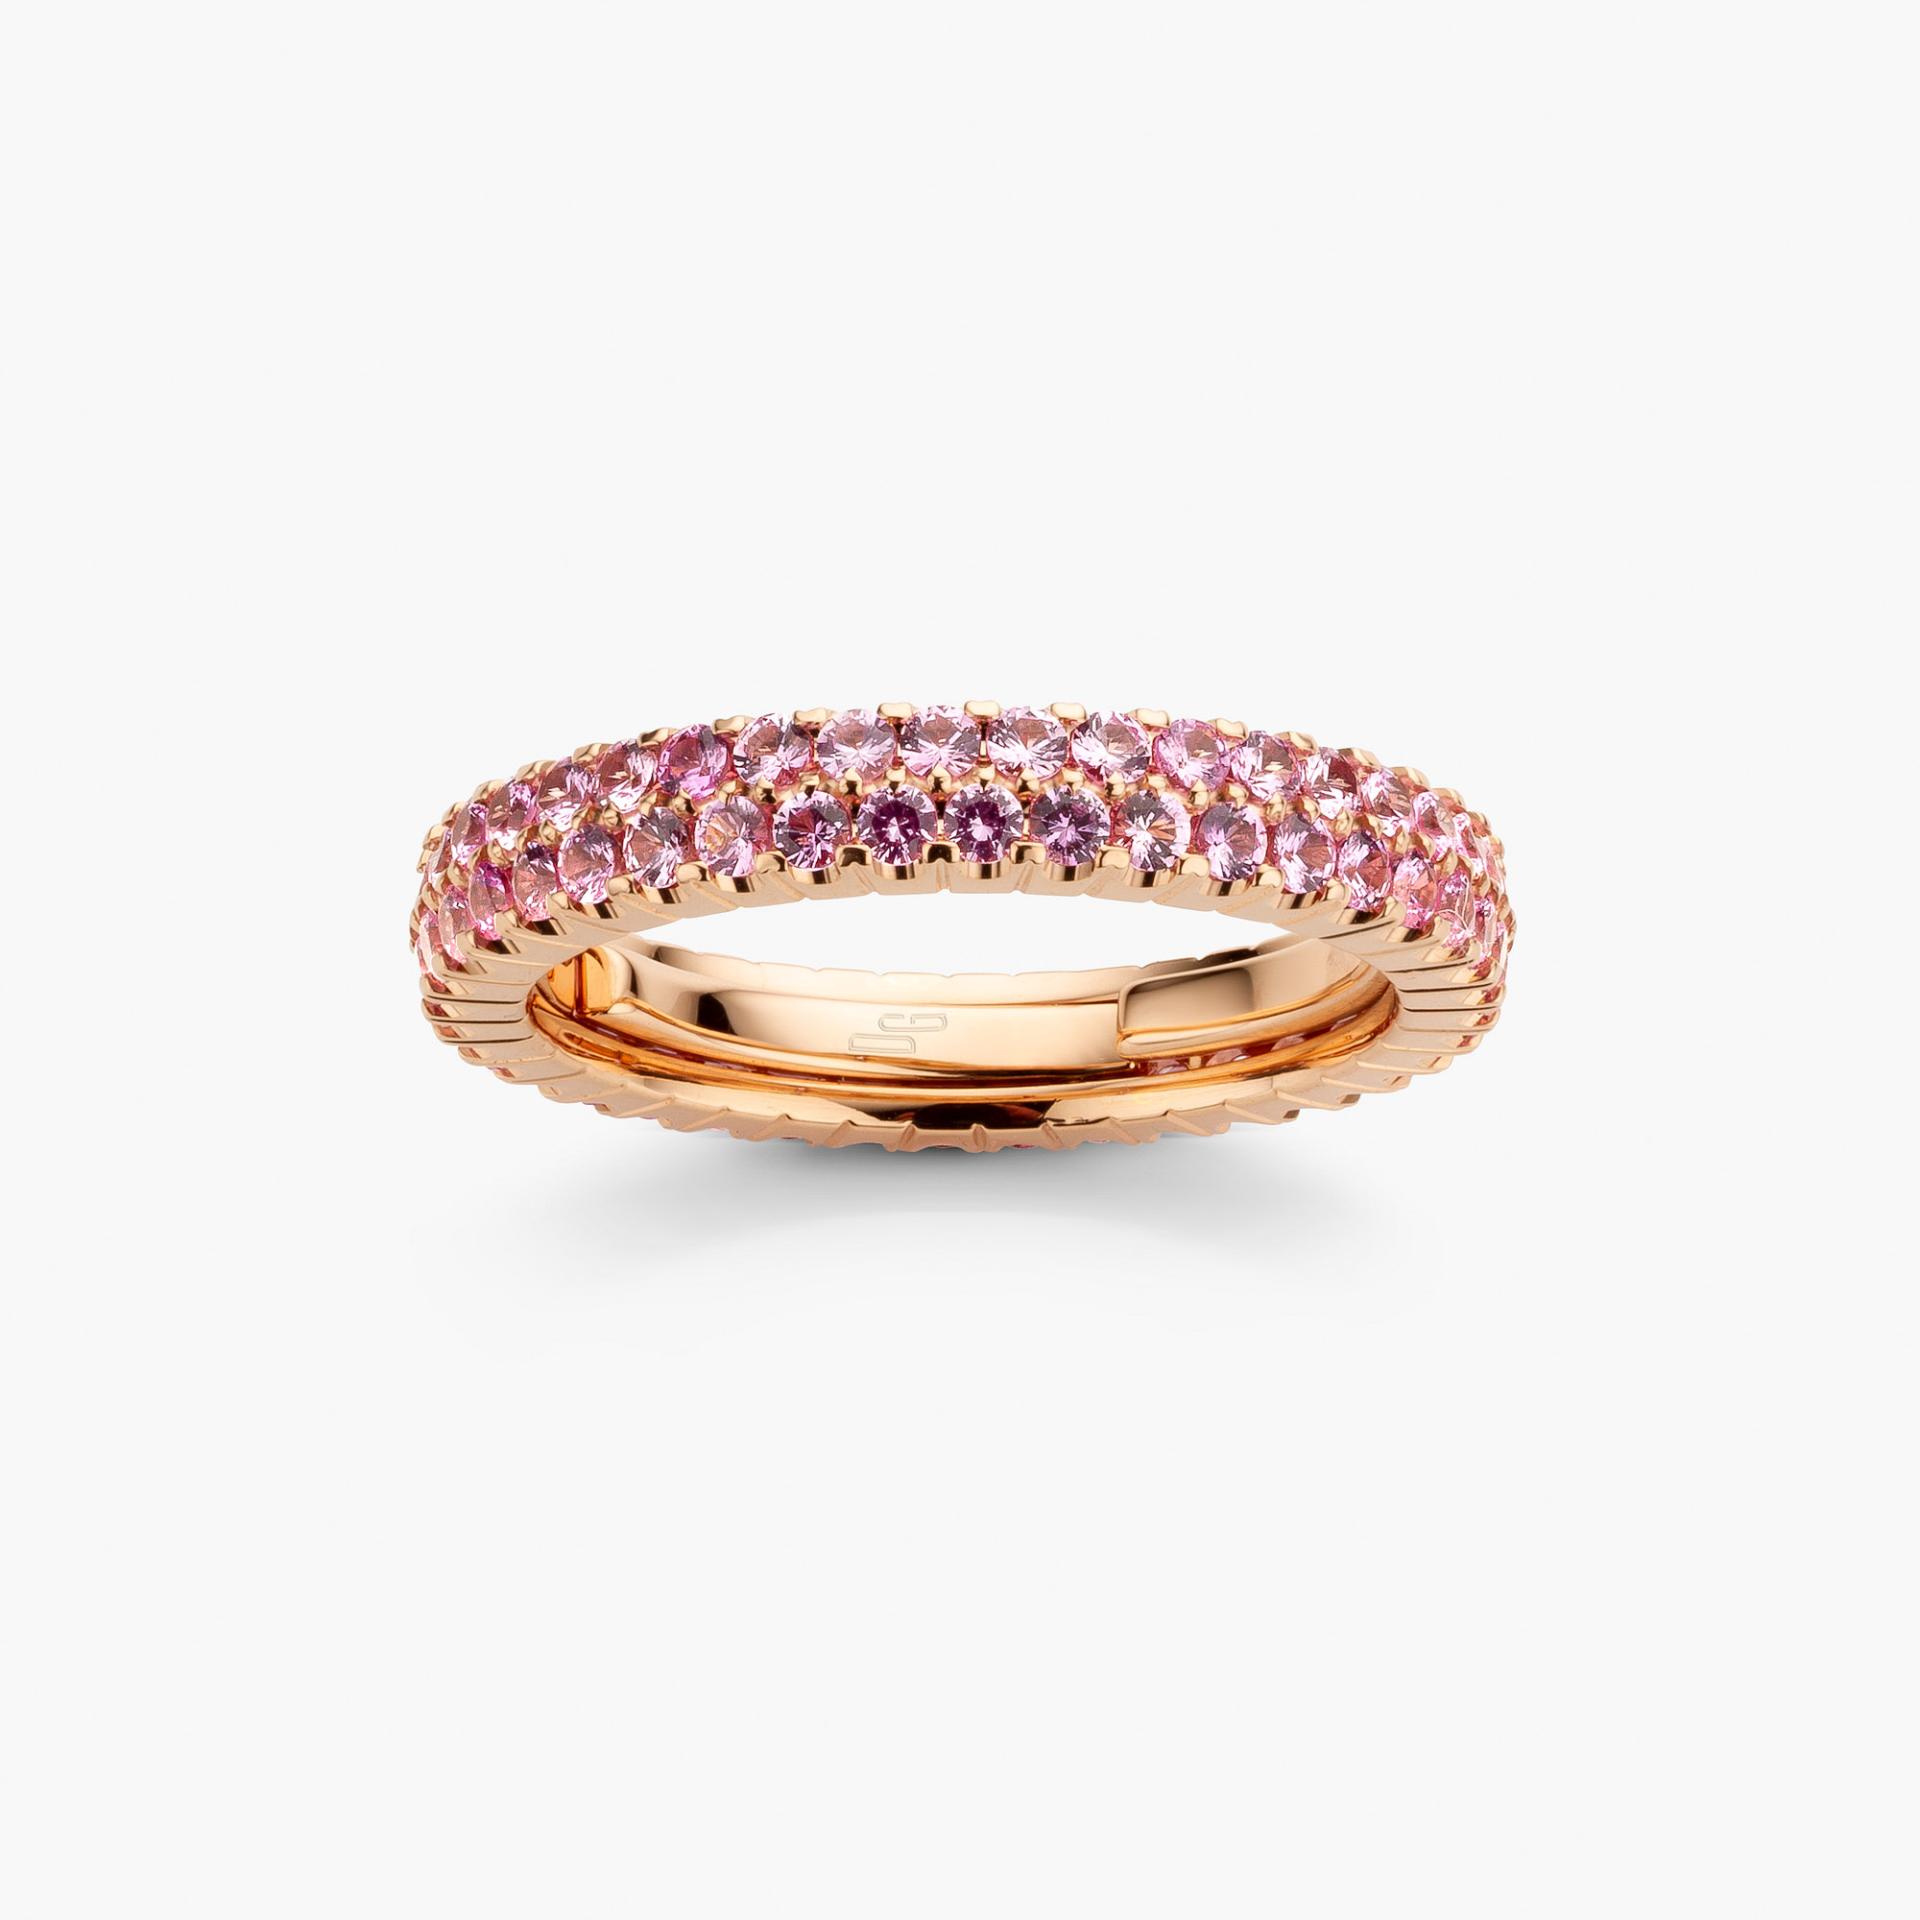 Rose gold ring Extensible set with pink sapphires made by Demeglio